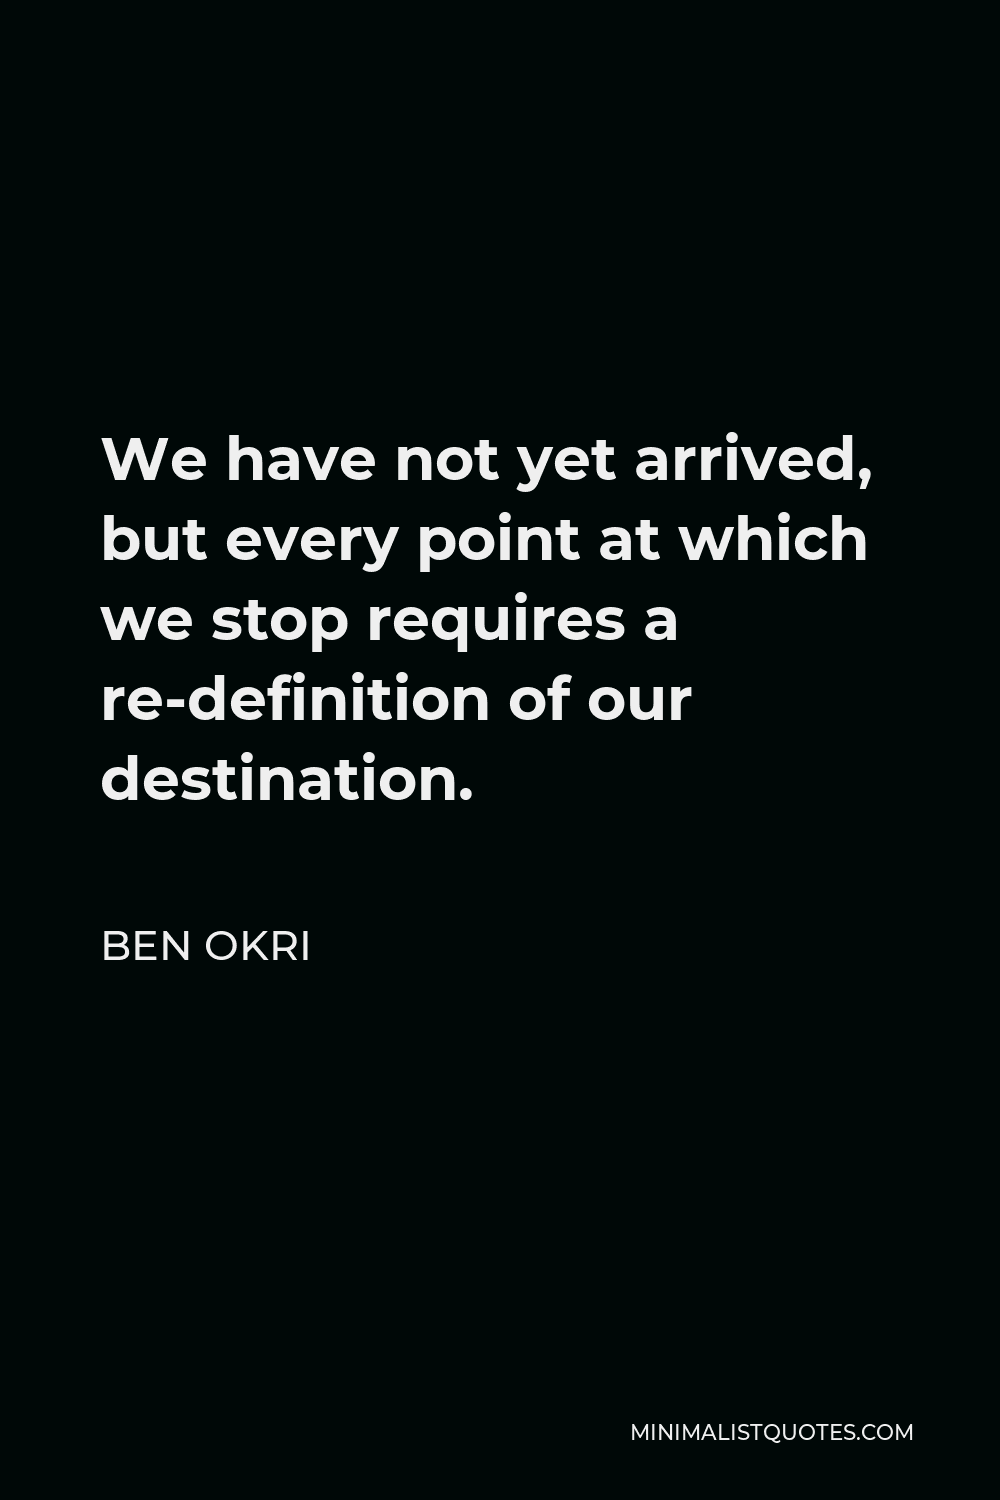 Ben Okri Quote - We have not yet arrived, but every point at which we stop requires a re-definition of our destination.